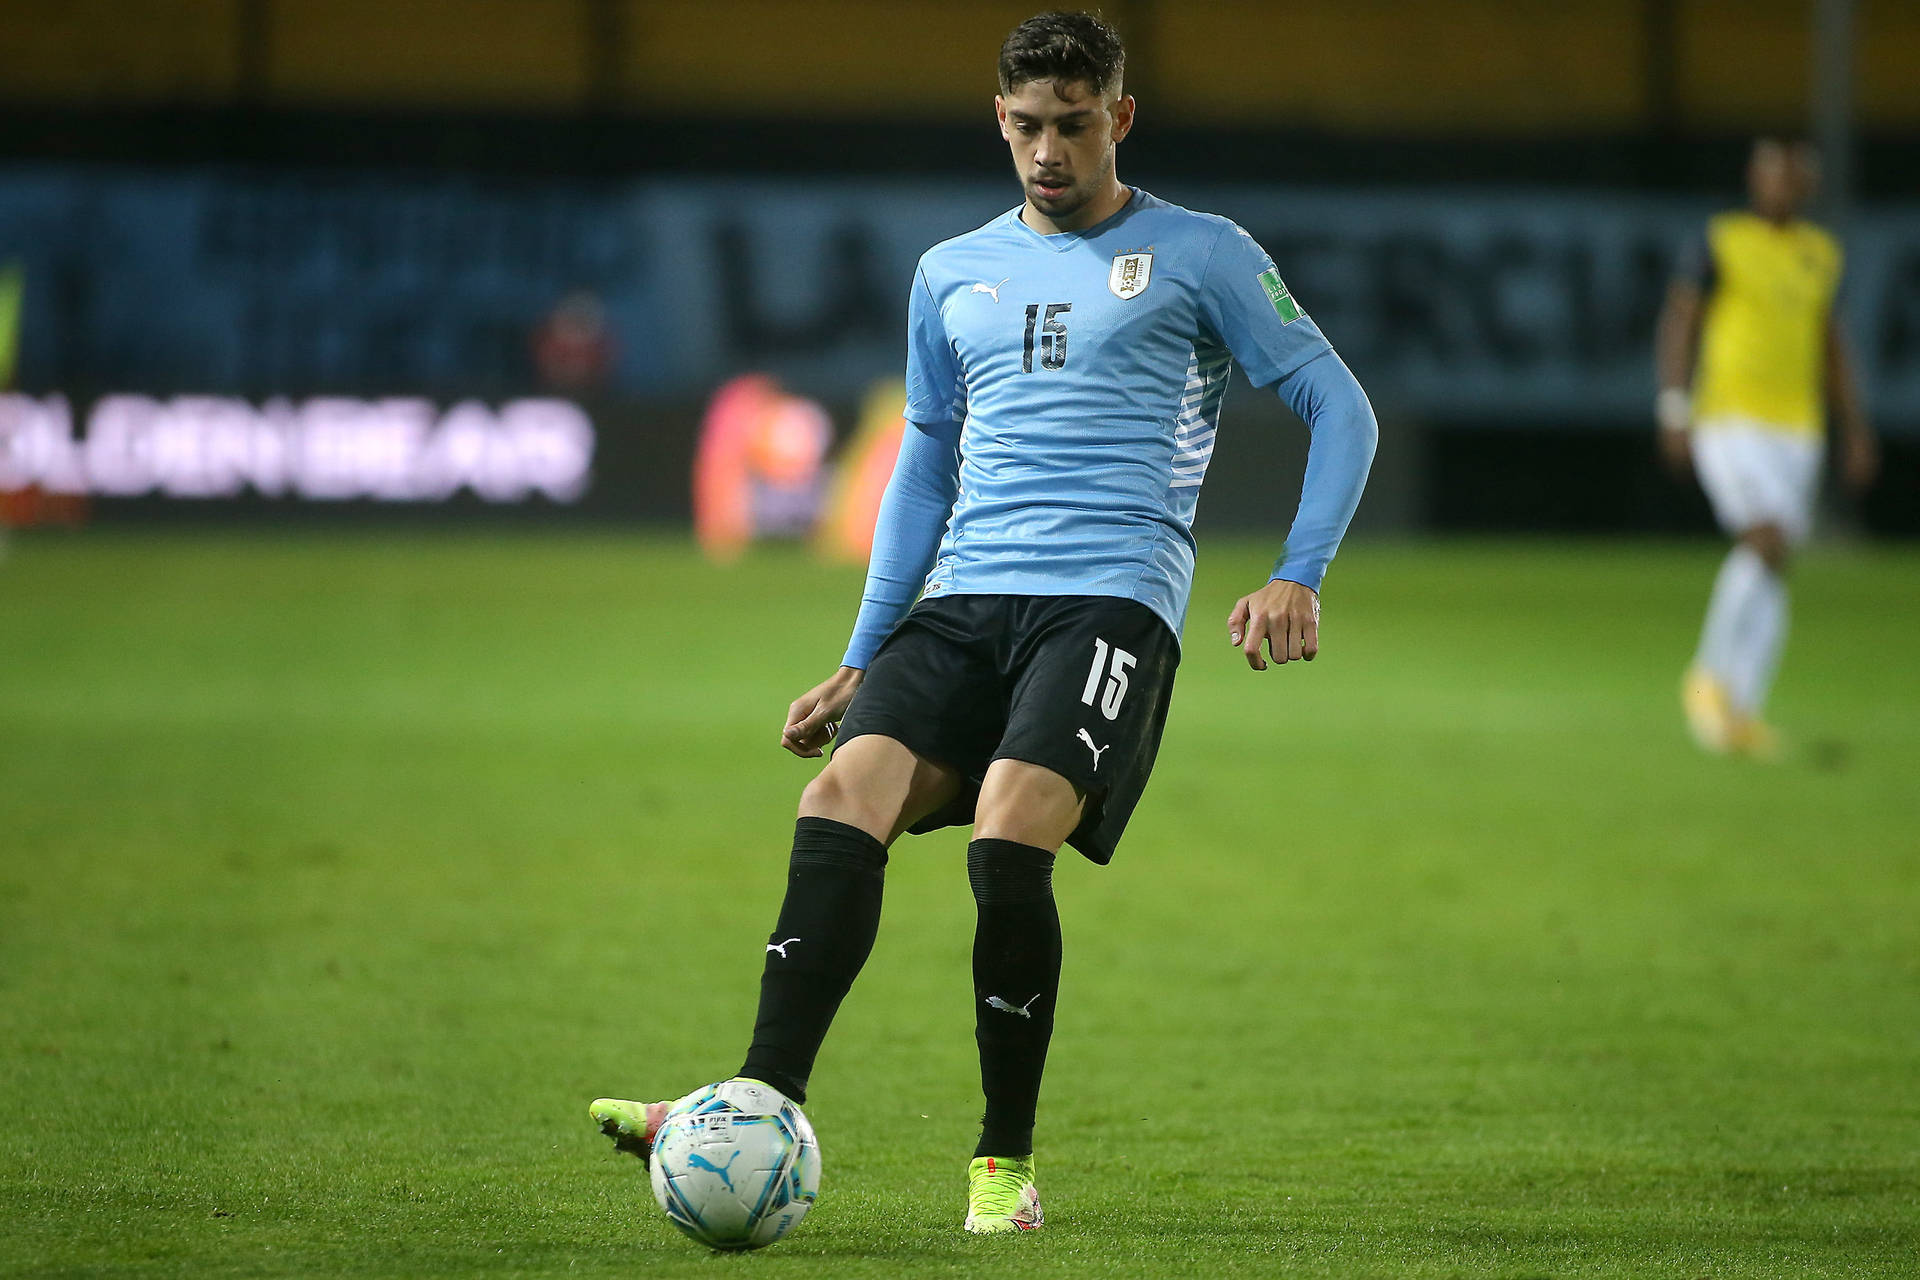 Caption: Federico Valverde in action for the Uruguay National Football Team Wallpaper